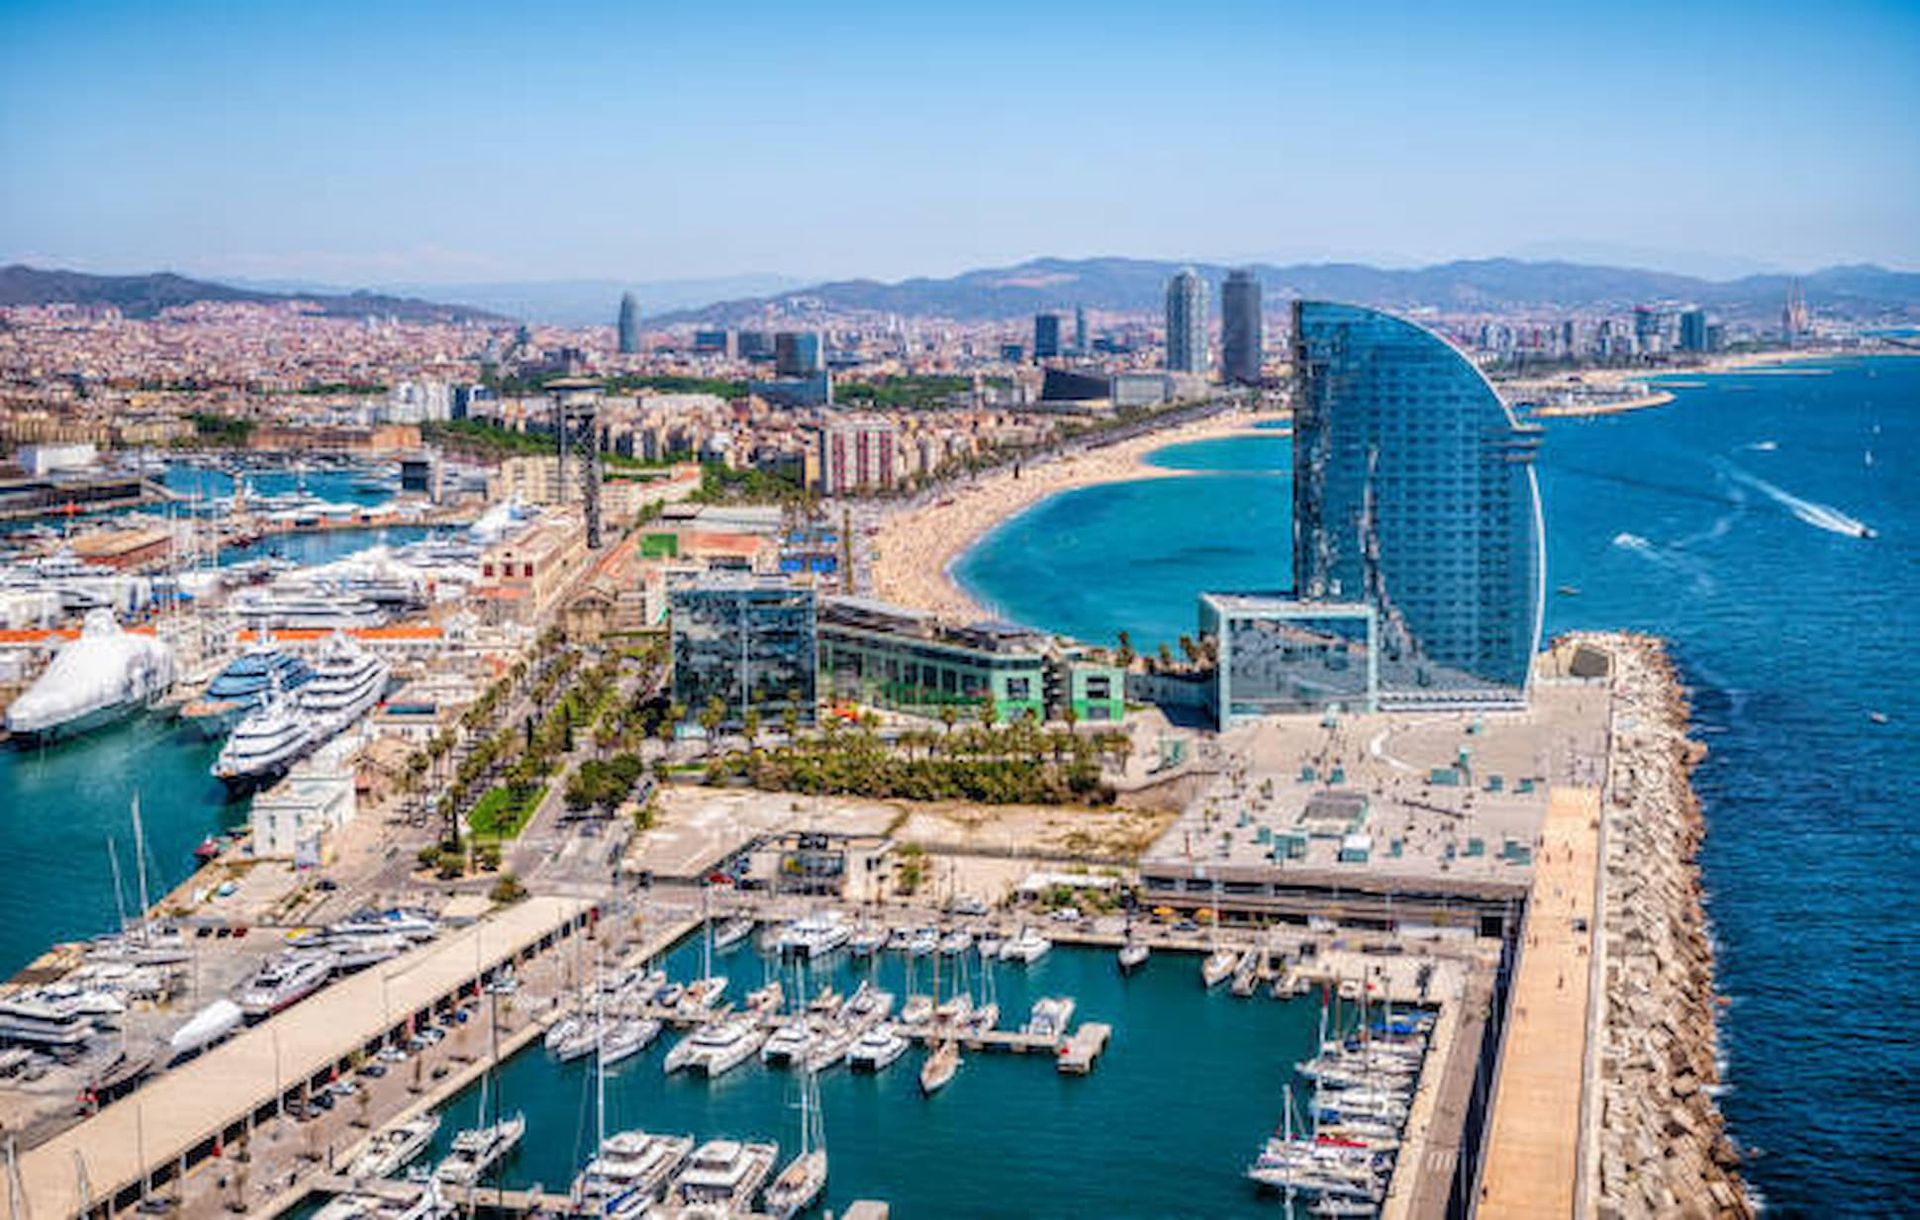 10 things to see and do in Barcelona on a weekend